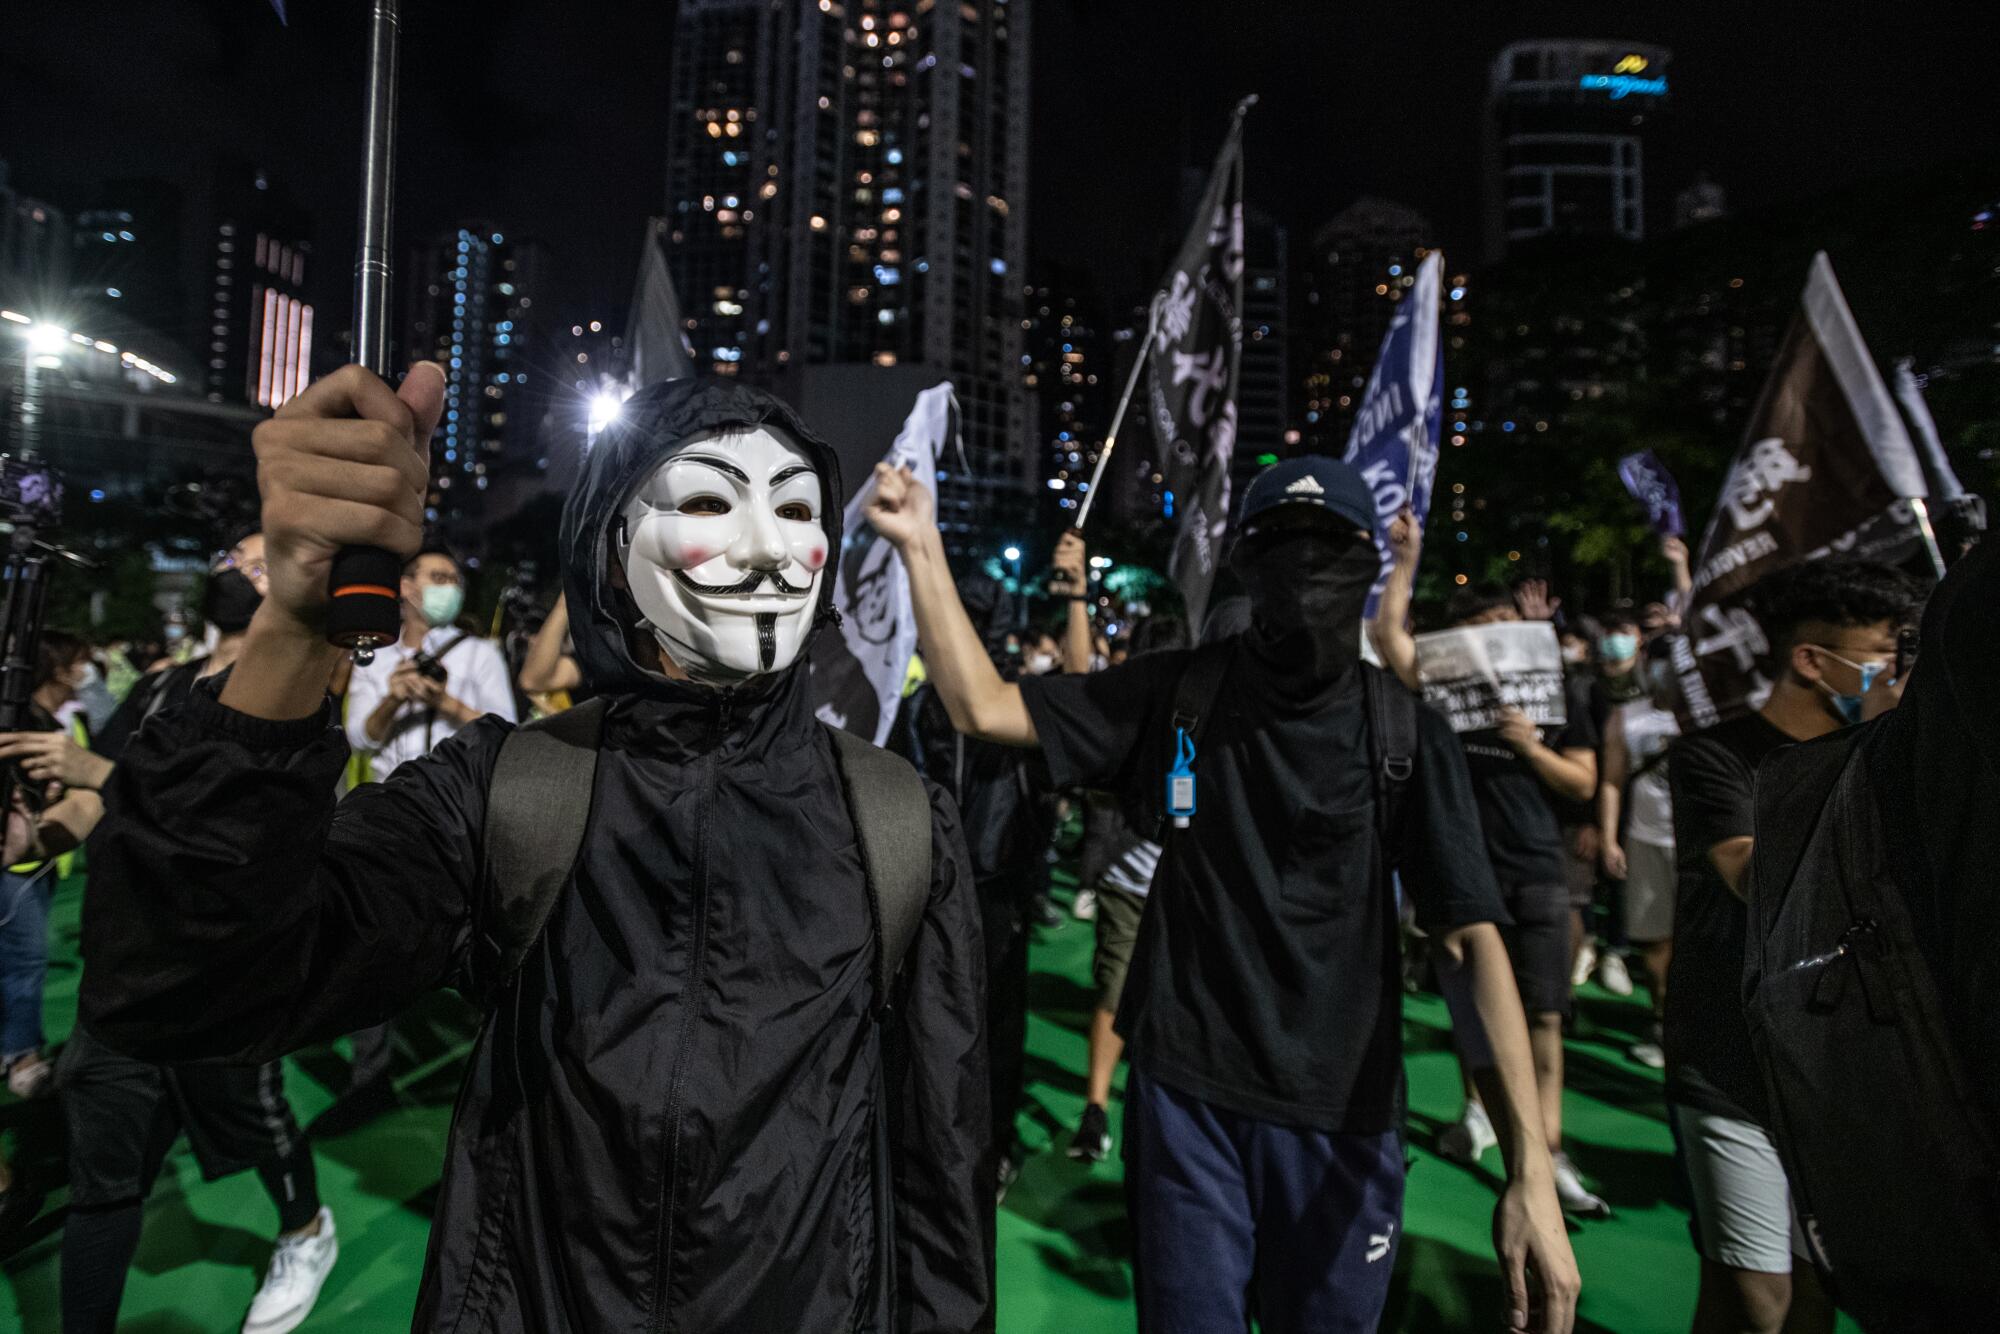 Younger protesters, some with more radical slogans like "Hong Kong independence," joined the vigil on June 4, 2020.